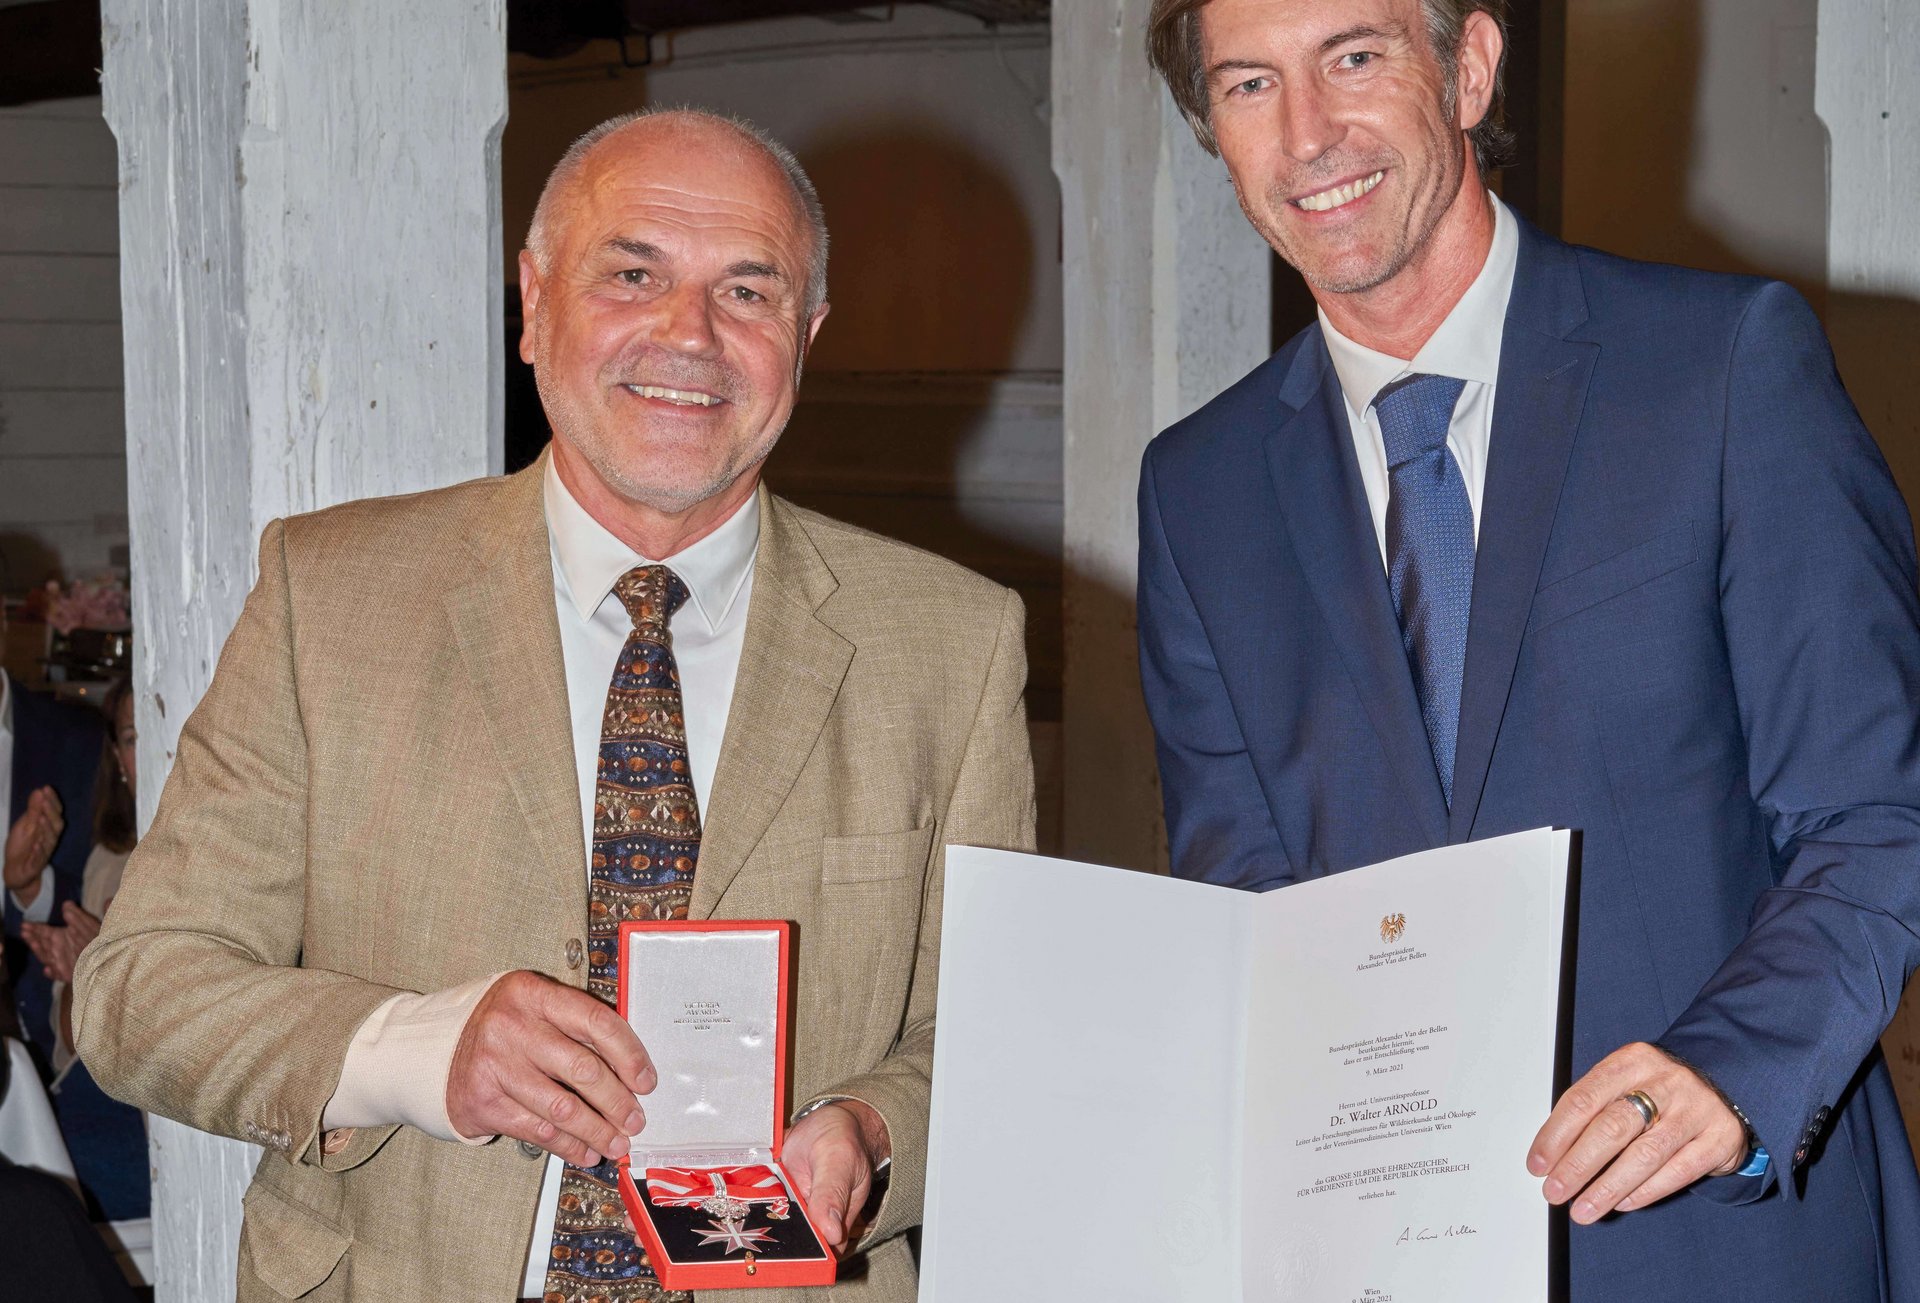 Presentation of the Great Silver Medal of Honor for Services to the Republic of Austria to Walter Arnold (left) by BMBWF Section Head Elmar Pichl. Photo: Gustav Bachmeyer